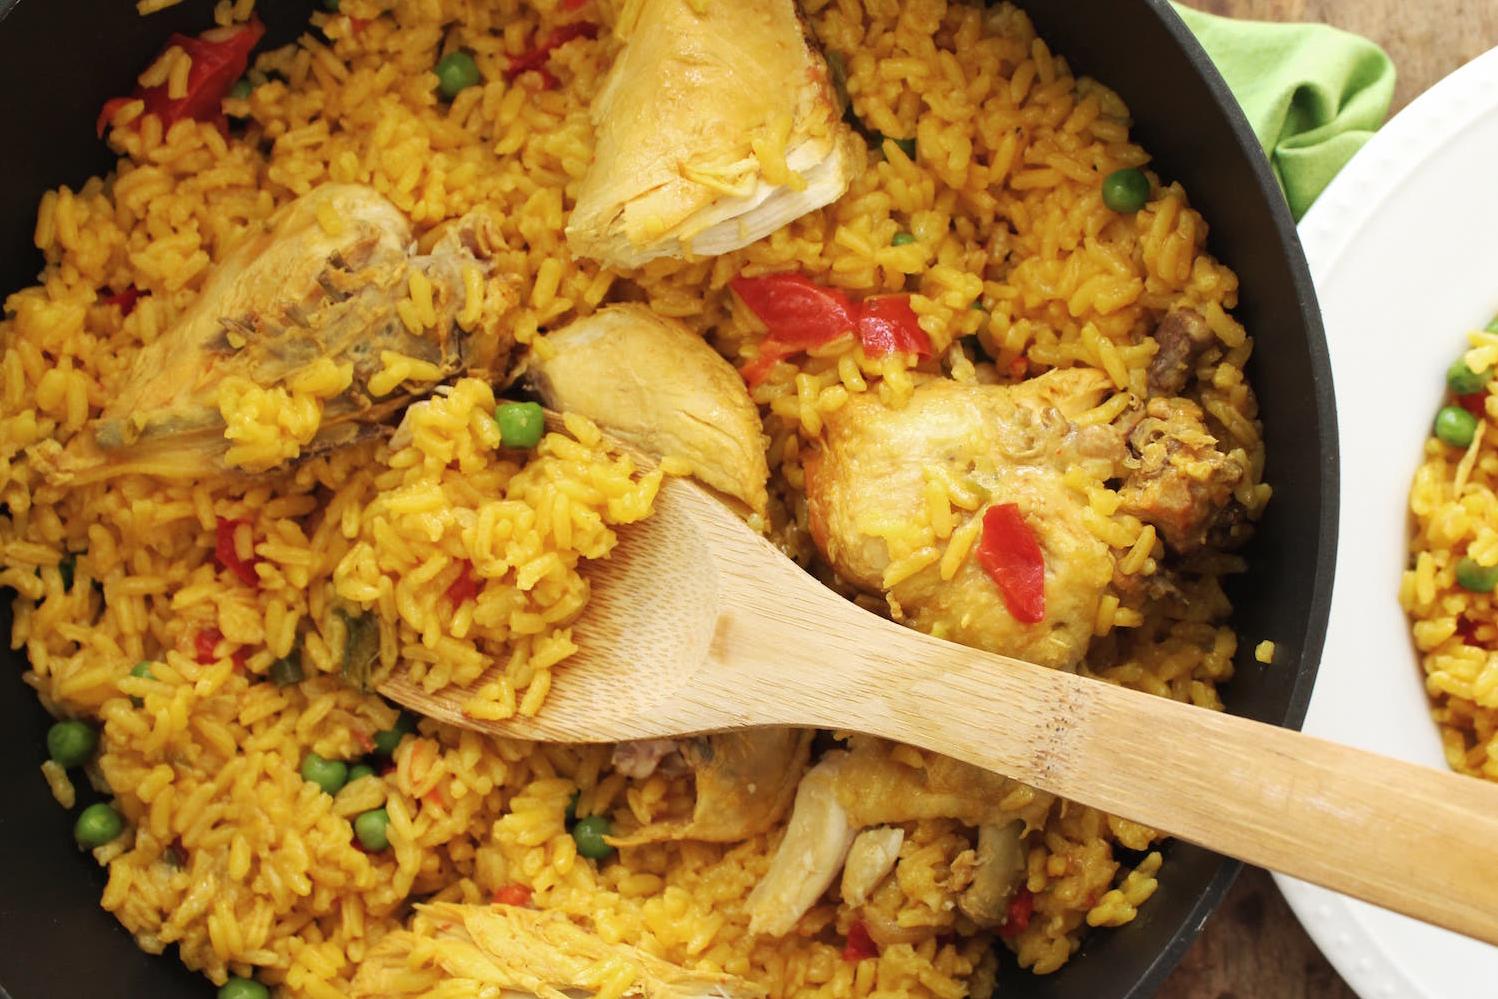  This arroz con pollo recipe is sure to impress your dinner guests with its flavors and aroma.